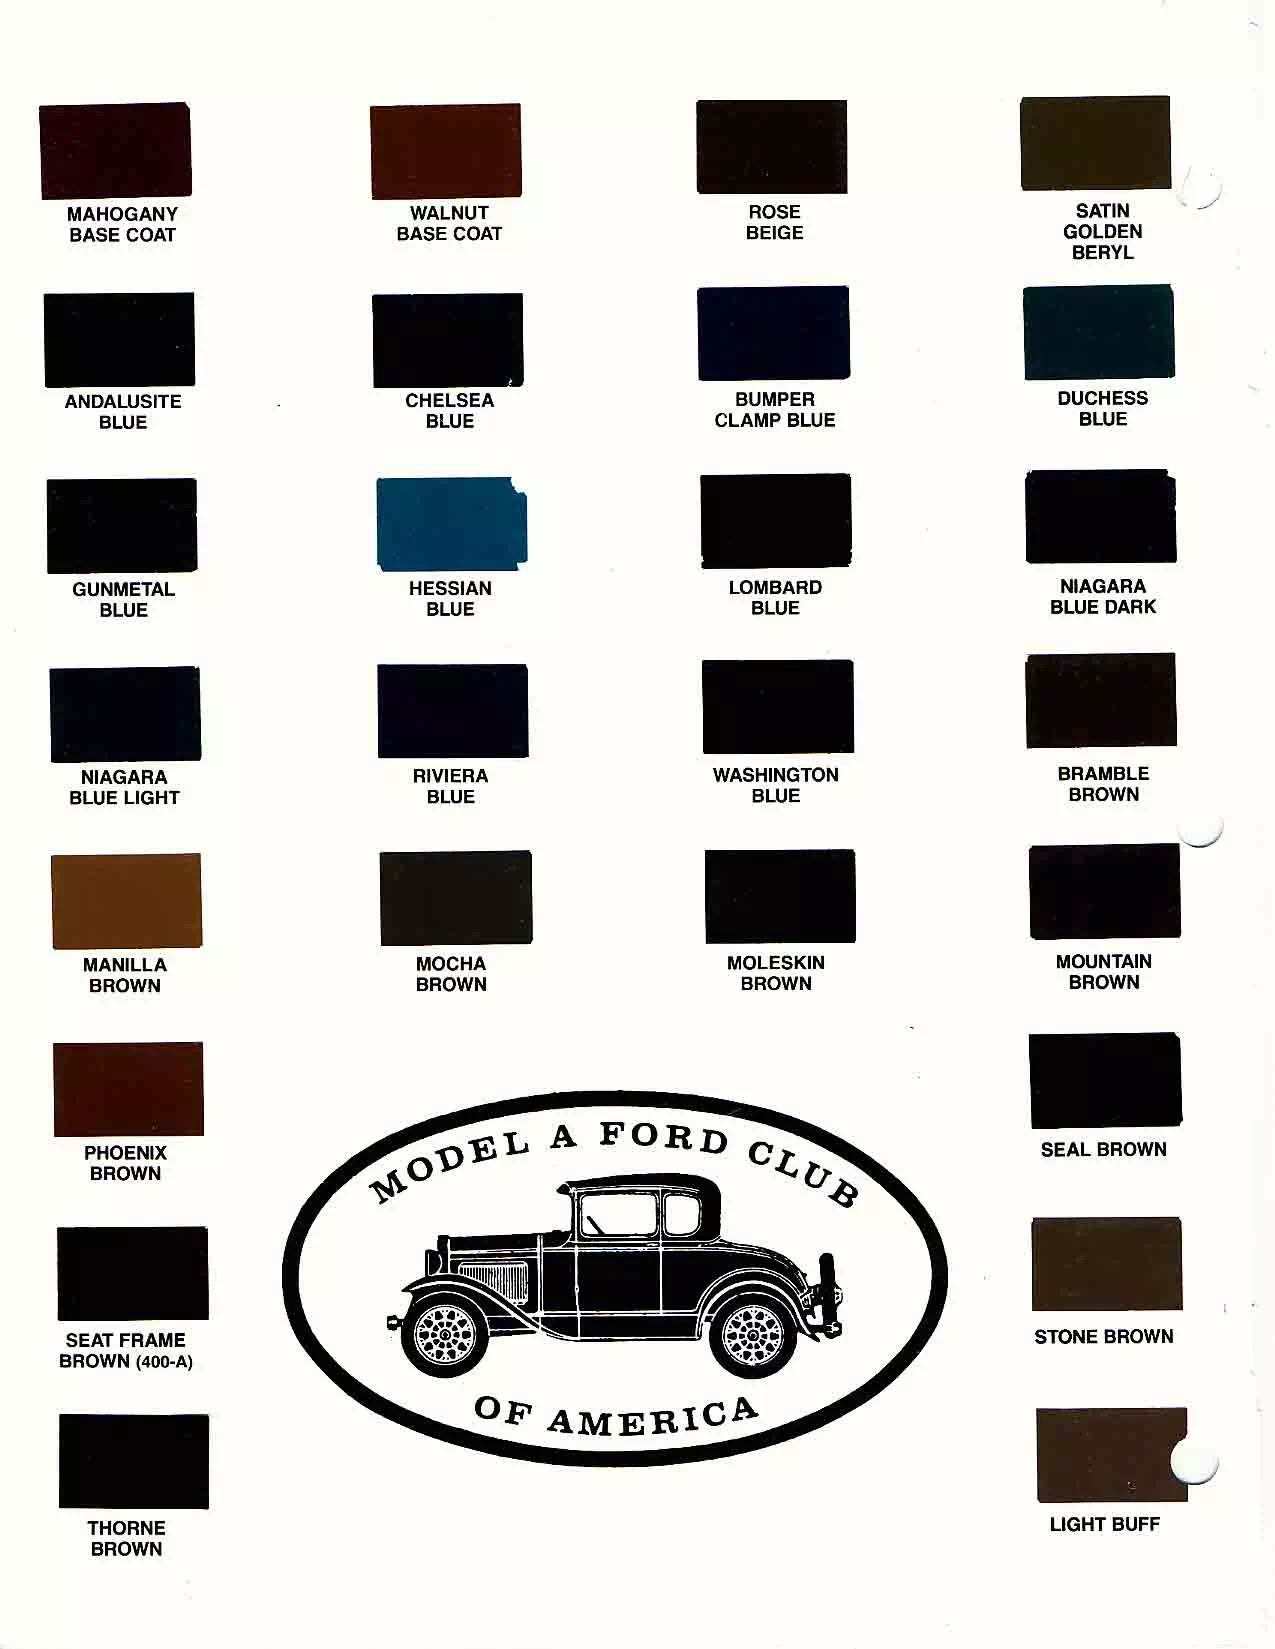 paint chips and color names for the most popular Model A's made by Ford